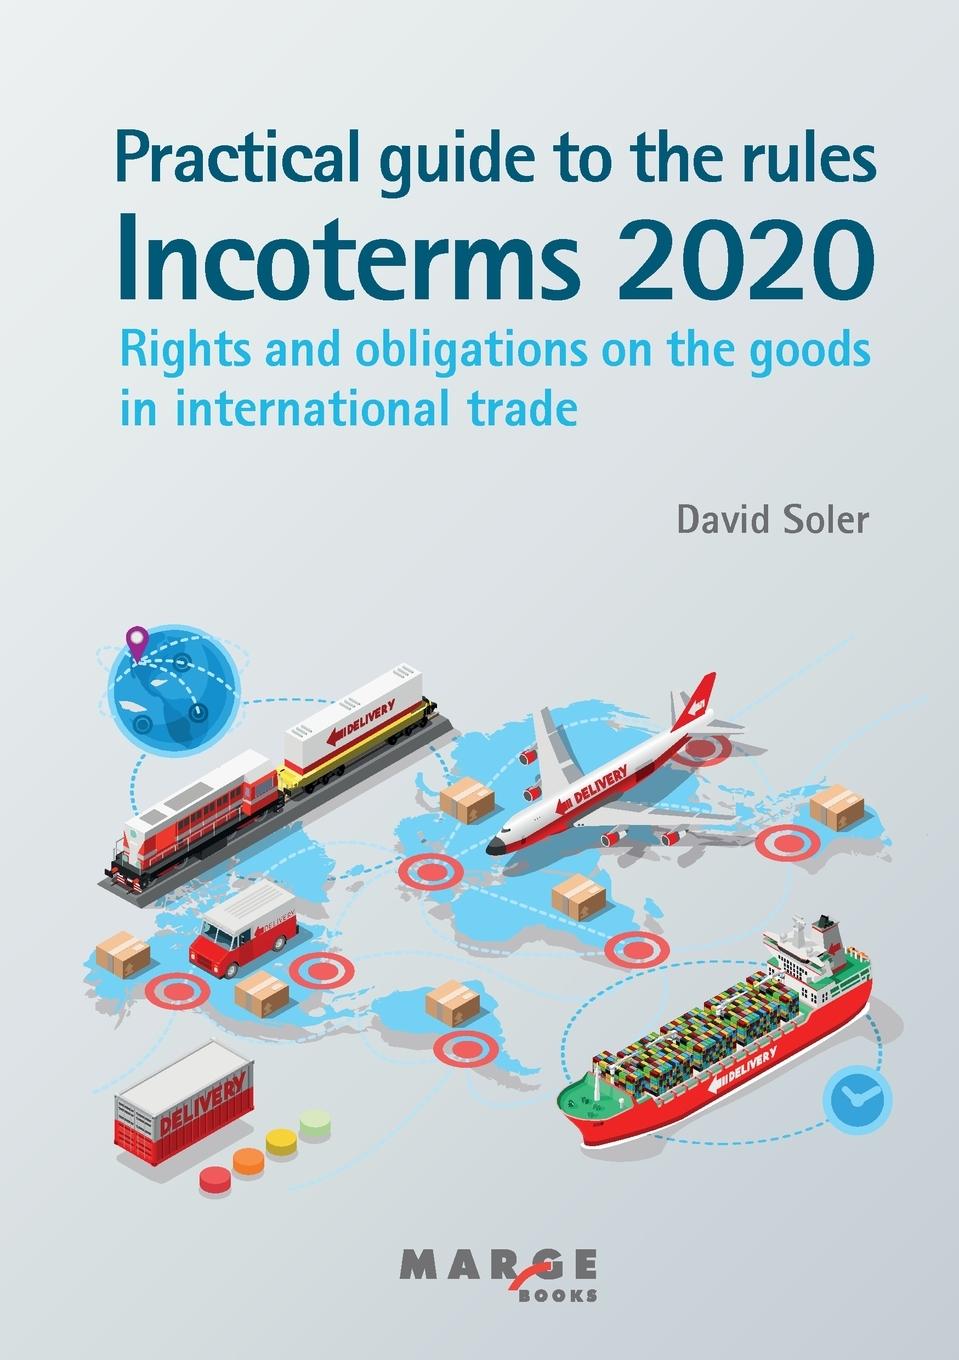 Könyv Practical guide to the Incoterms 2020 rules David Soler